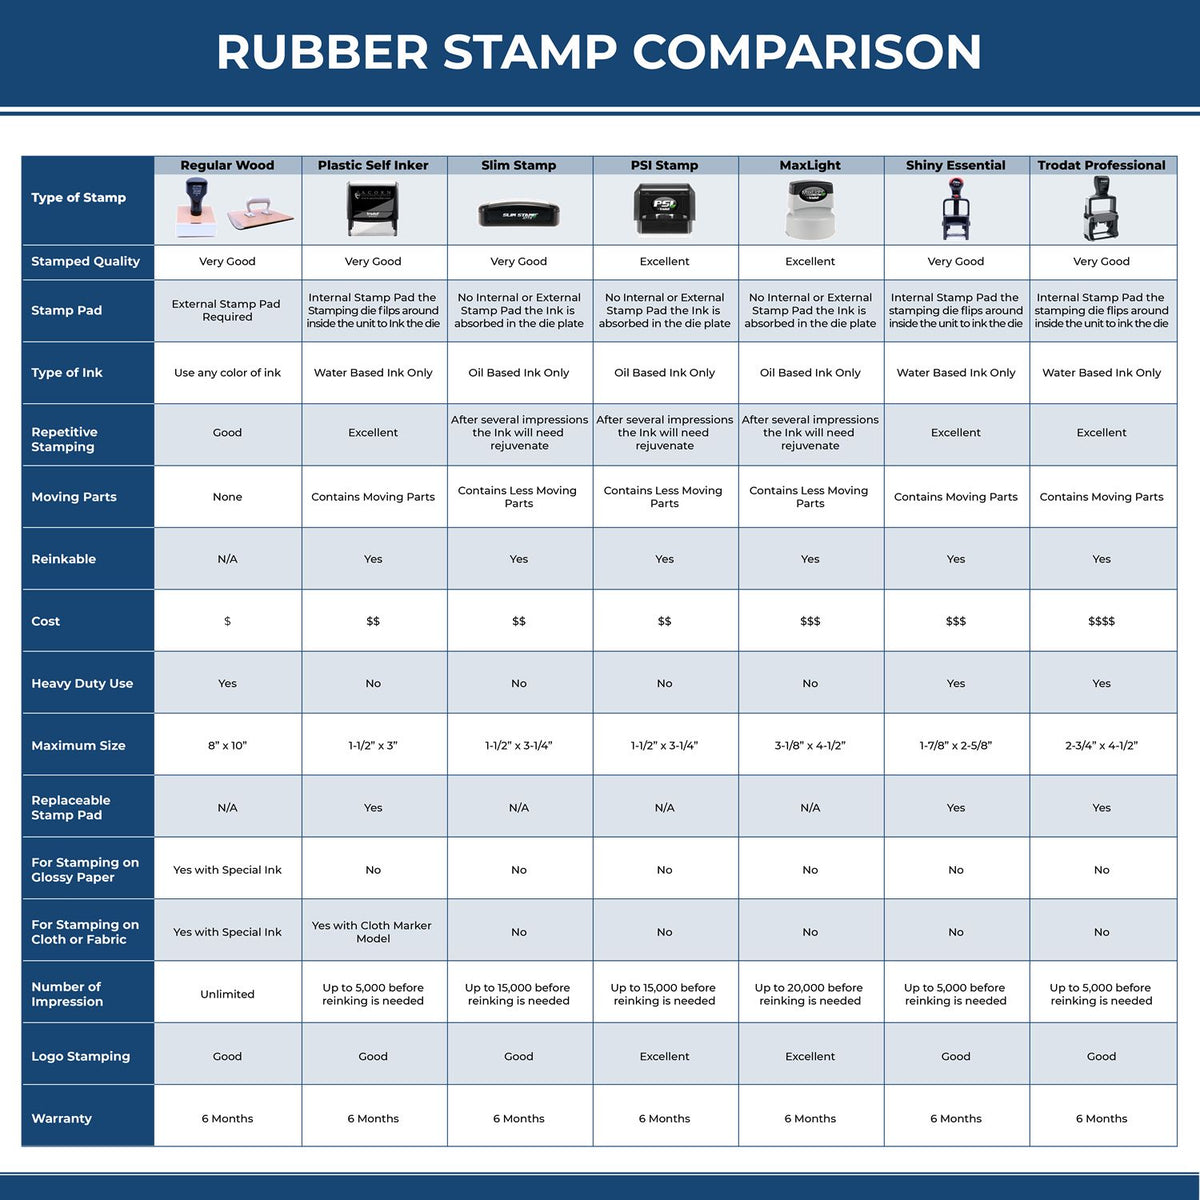 Large Self Inking Disclosures Stamp 4557S Rubber Stamp Comparison